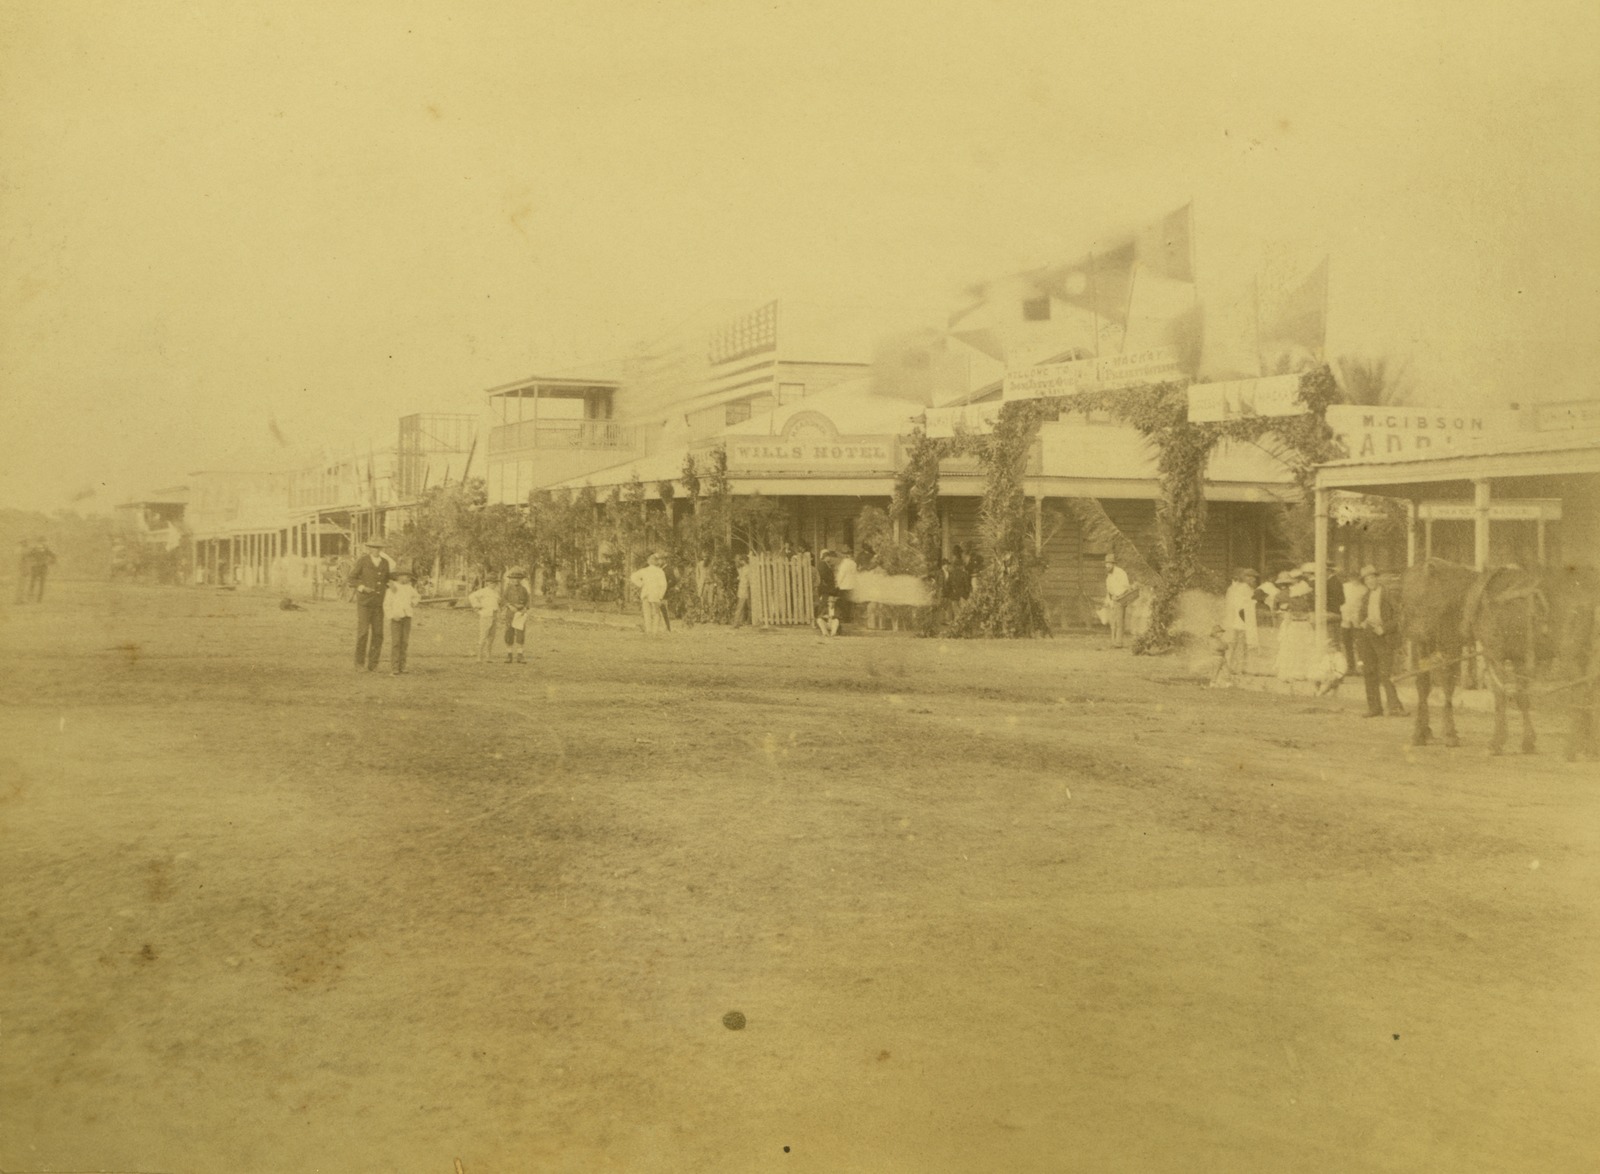 Decorations in Mackay for the visit of the Queensland Governor, Sir Anthony Musgrave in December 1883 